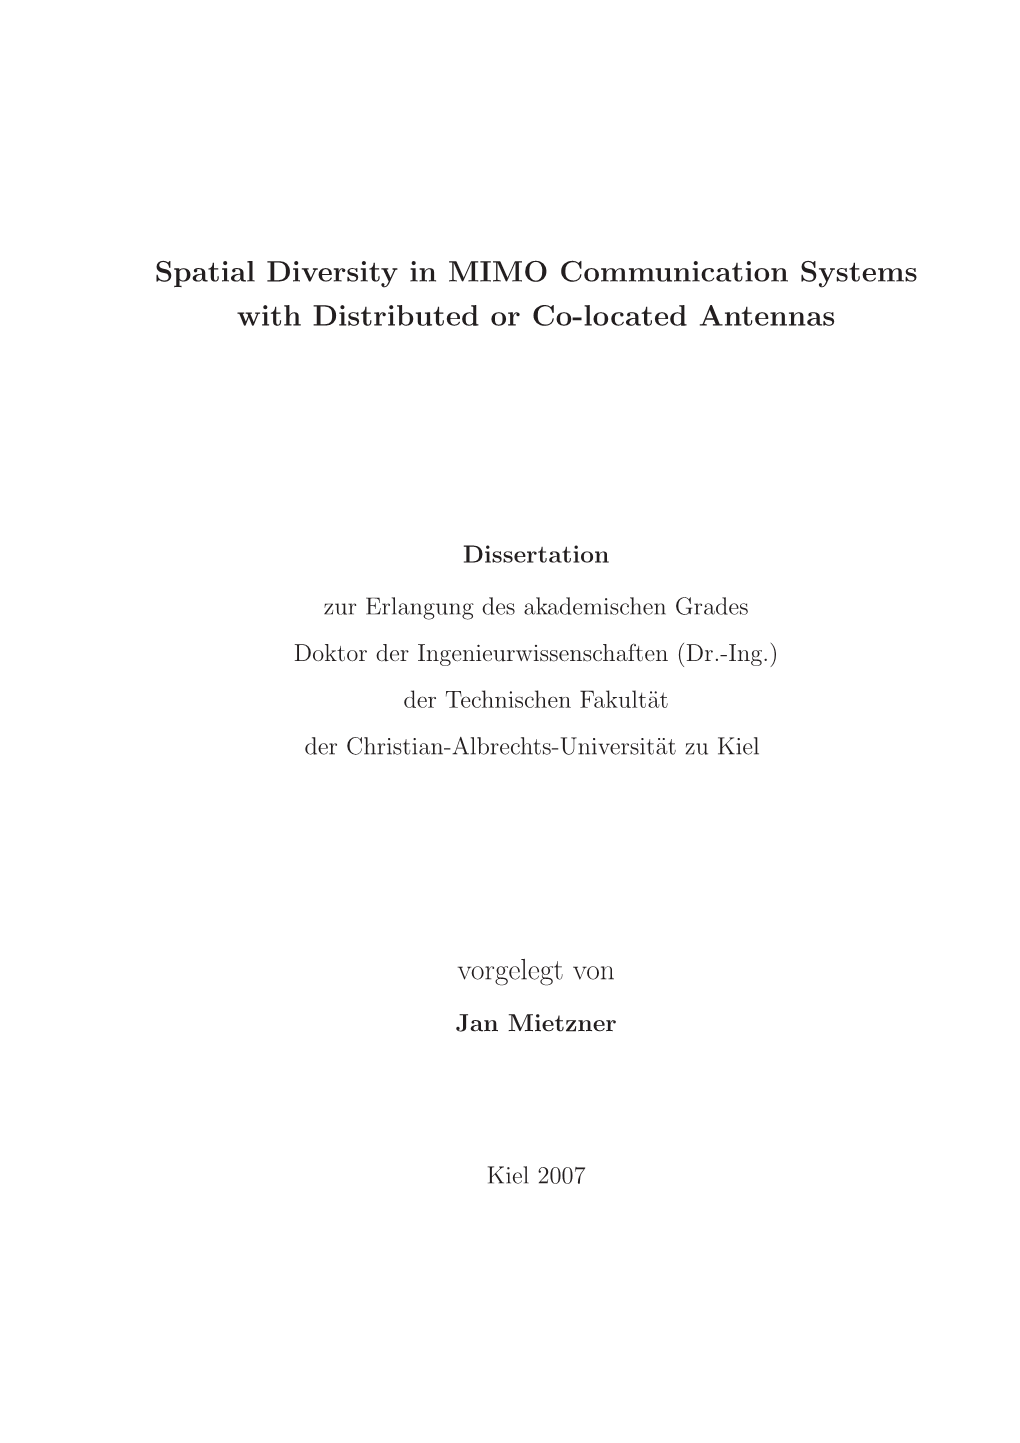 Spatial Diversity in MIMO Communication Systems with Distributed Or Co-Located Antennas